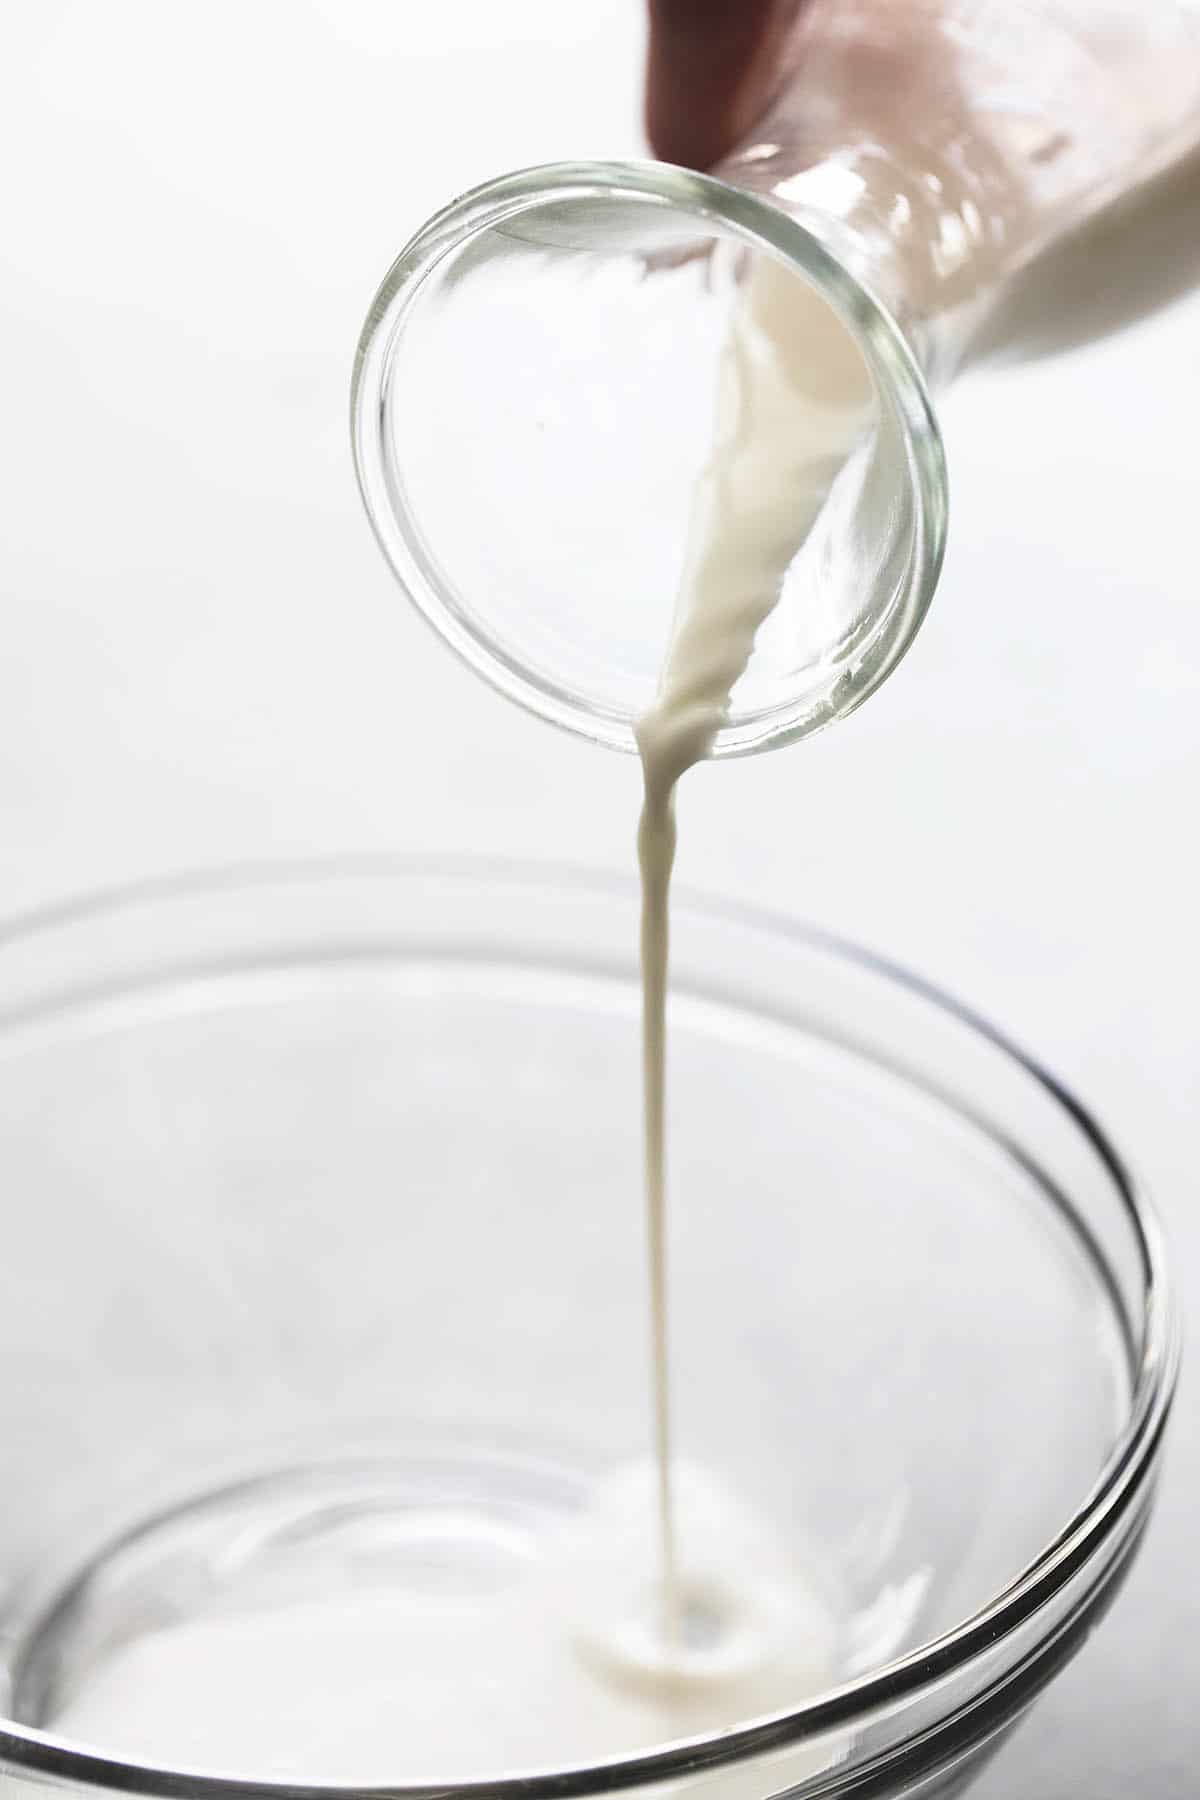 milk being poured into a glass bowl from a carafe.